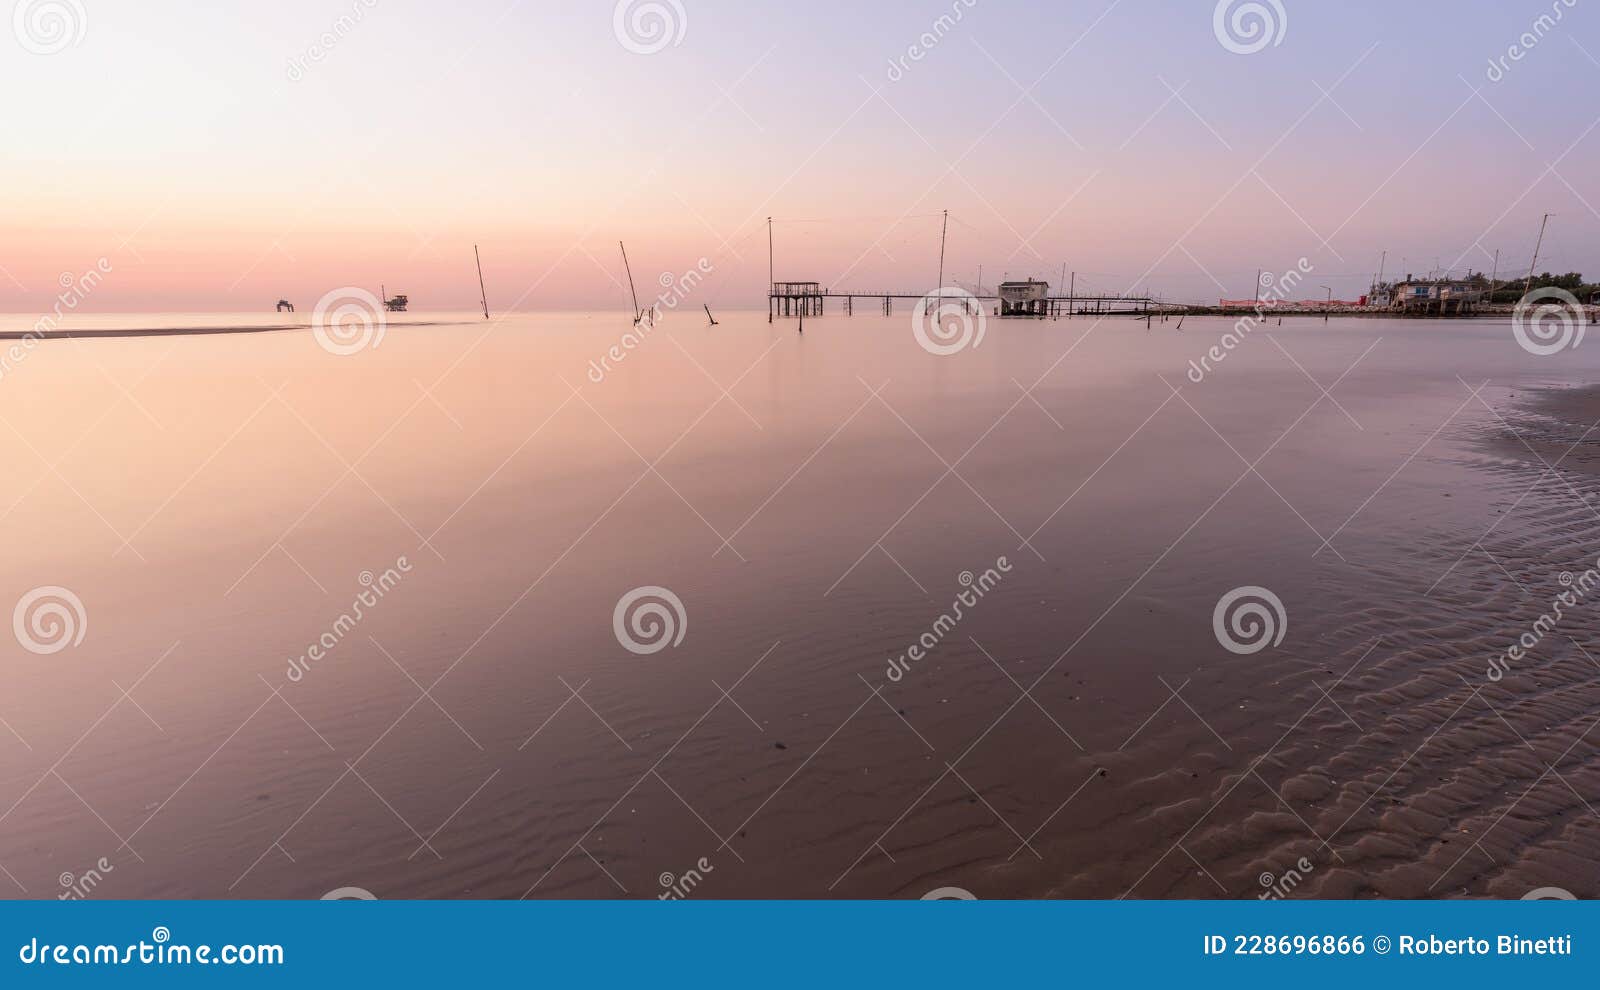 landscape view of fishing huts at sunrise